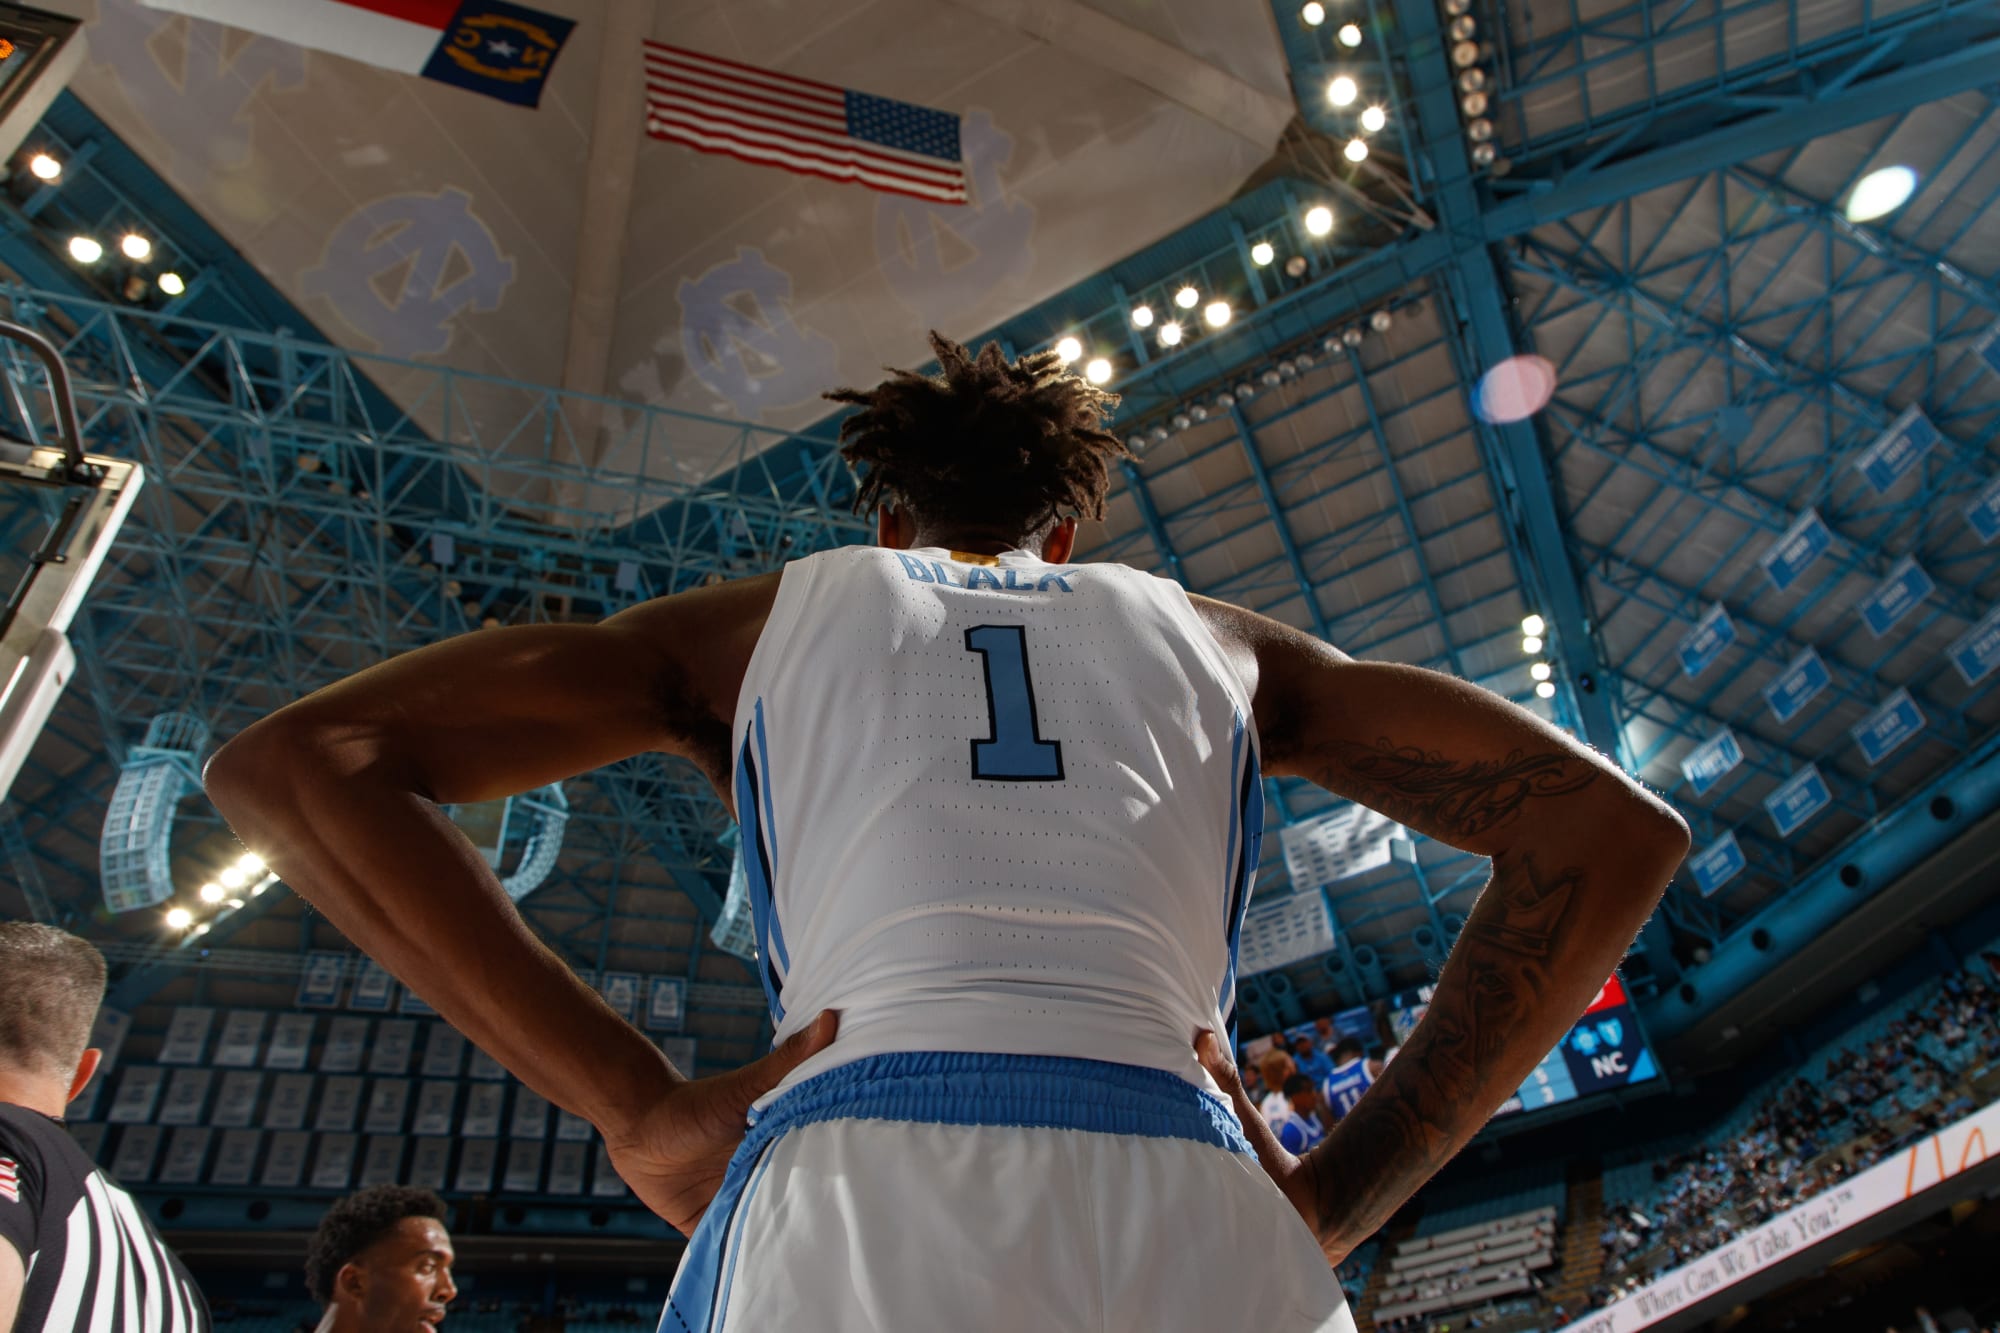 UNC Basketball has different plans for this year's 'Senior Night'